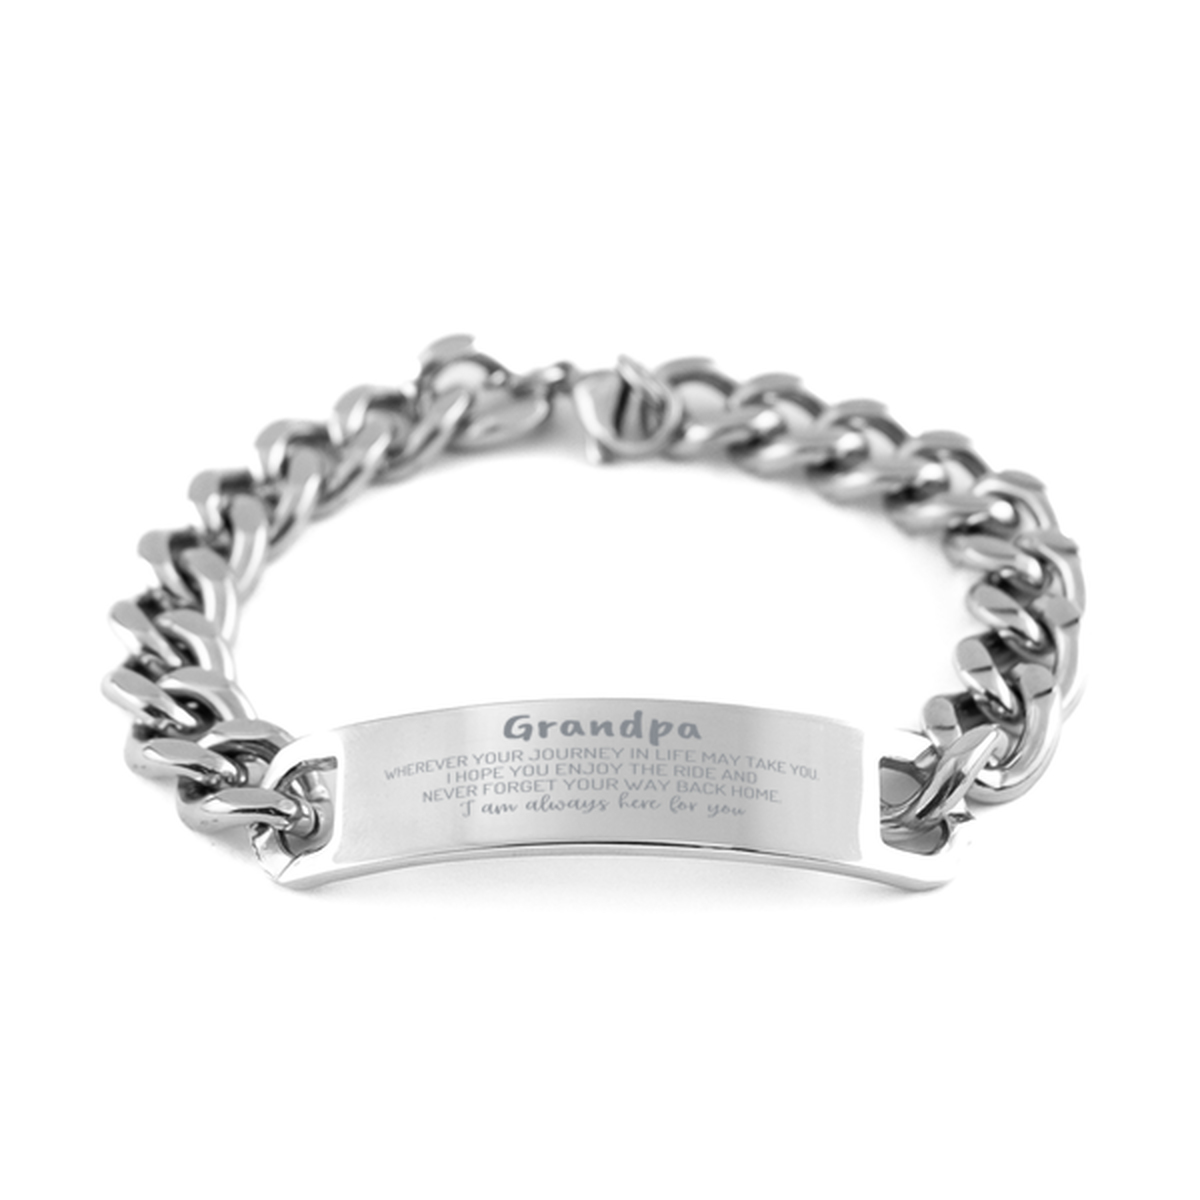 Grandpa wherever your journey in life may take you, I am always here for you Grandpa Cuban Chain Stainless Steel Bracelet, Awesome Christmas Gifts For Grandpa, Grandpa Birthday Gifts for Men Women Family Loved One